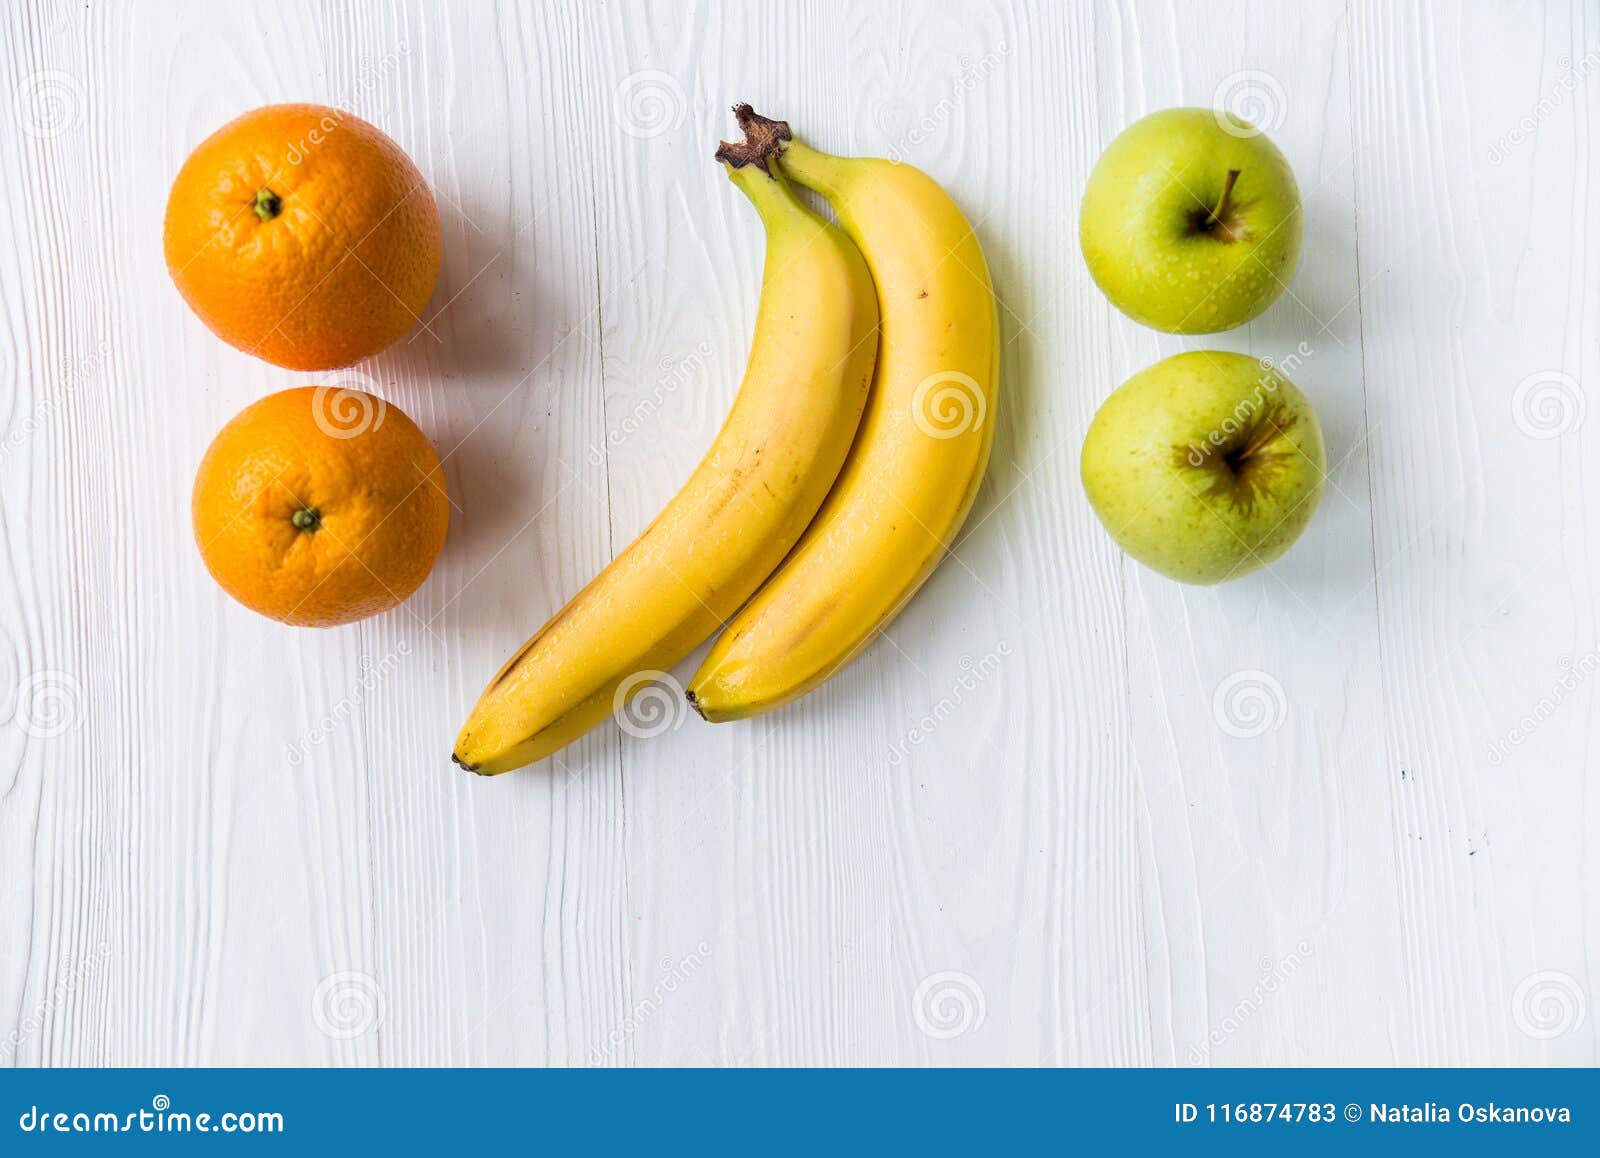 Fresh Apples Oranges And Bananas On White Stock Image Image Of Clean